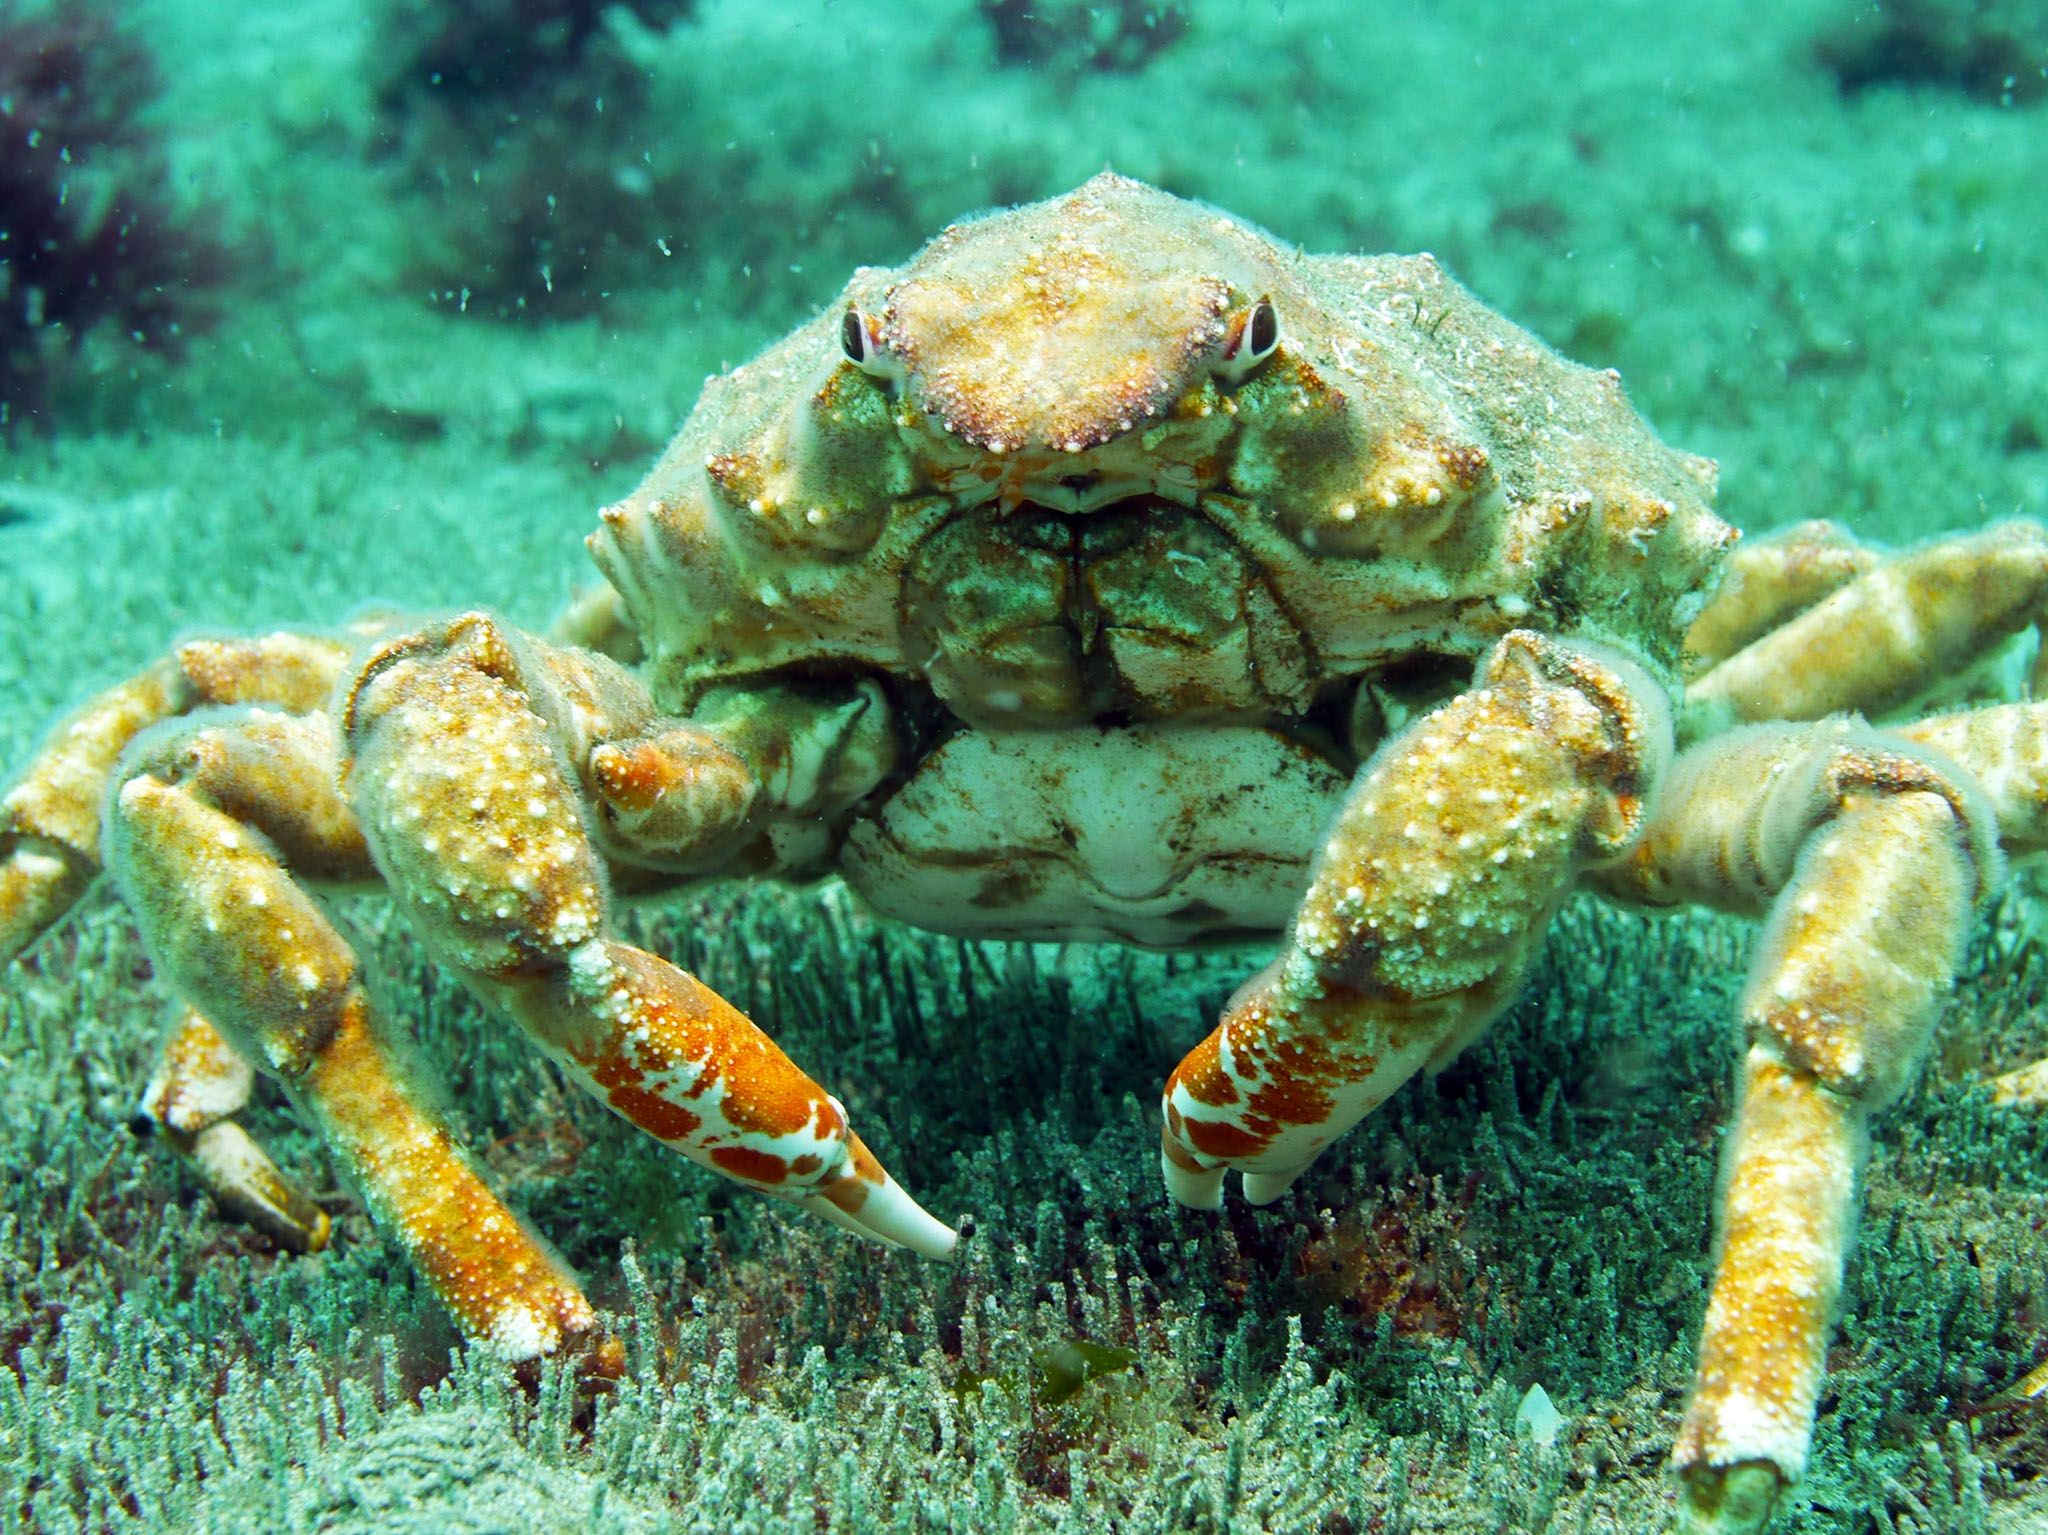 Auckland Islands, New Zealand: Female giant spider crab. This image is from Savage Island Giants. [Photo of the day - July 2017]